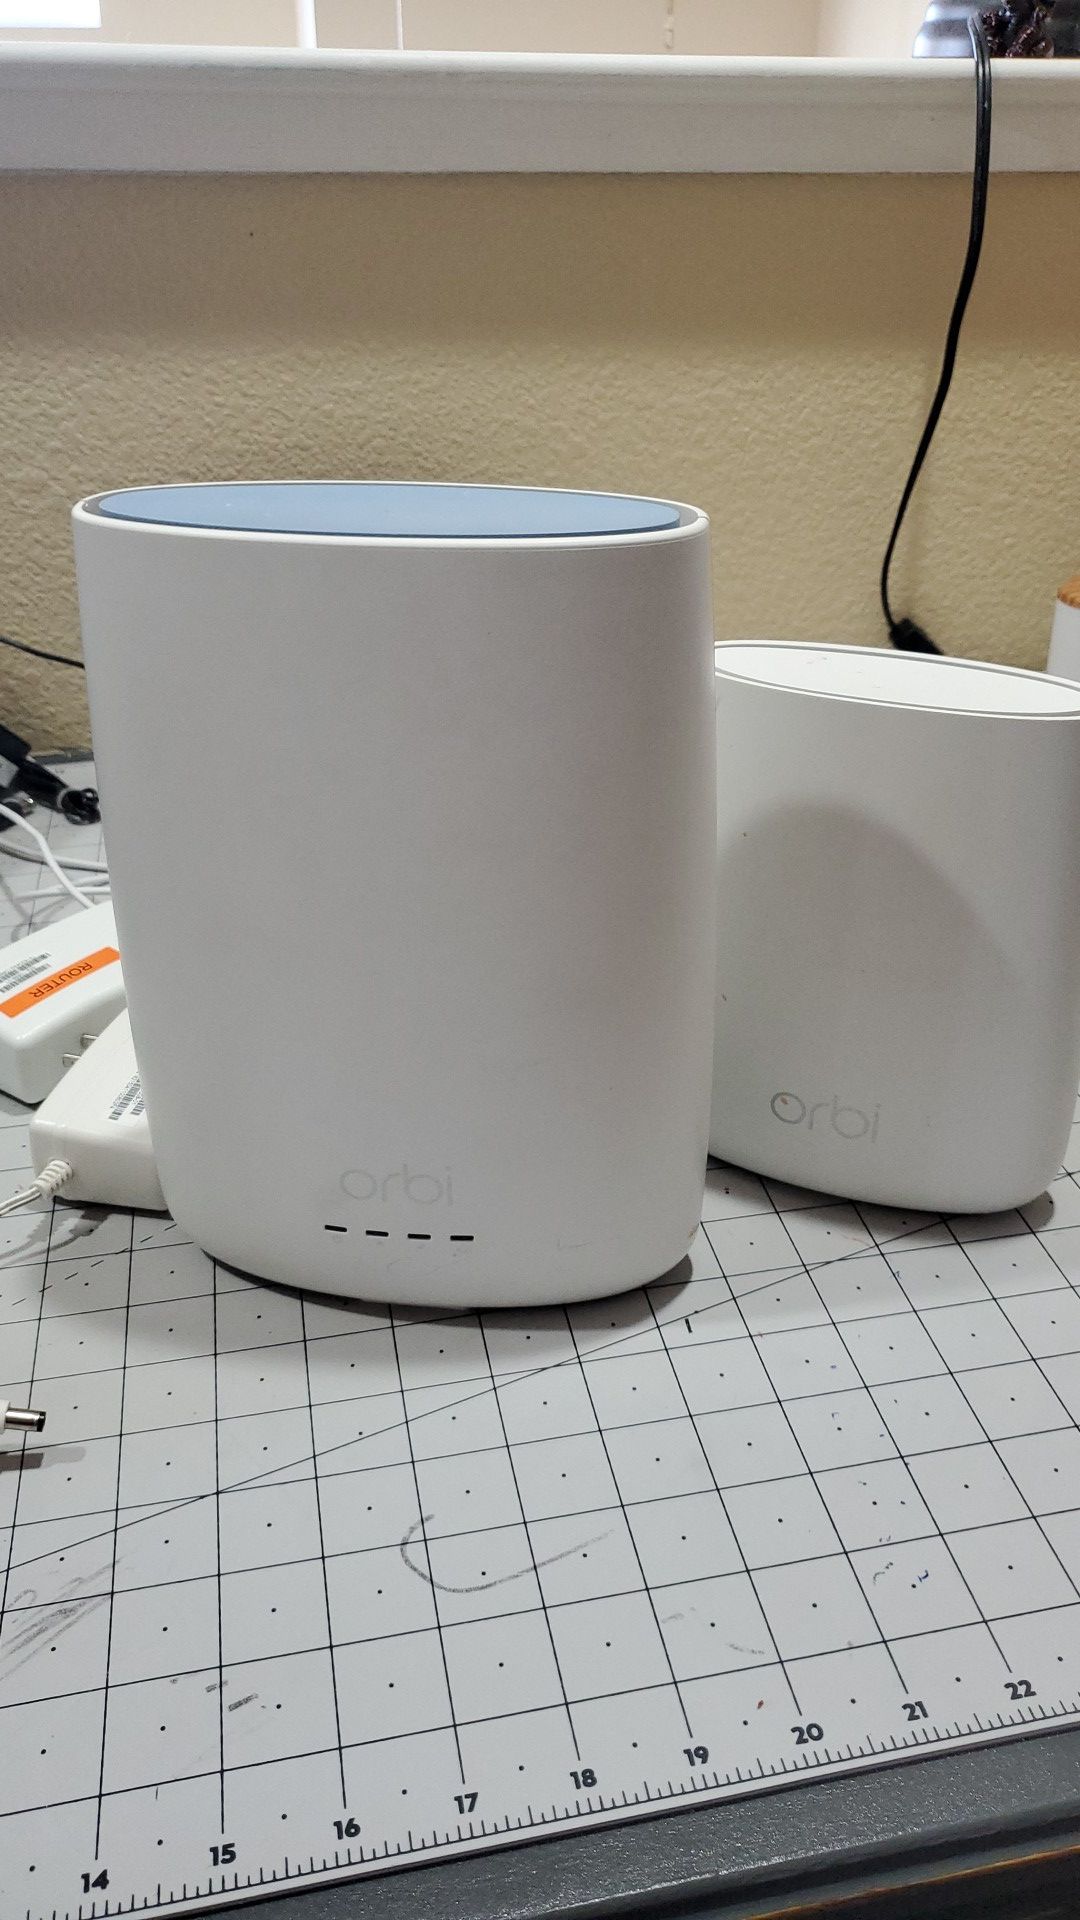 Netgear Orbi All in one Mesh Router with Satellite